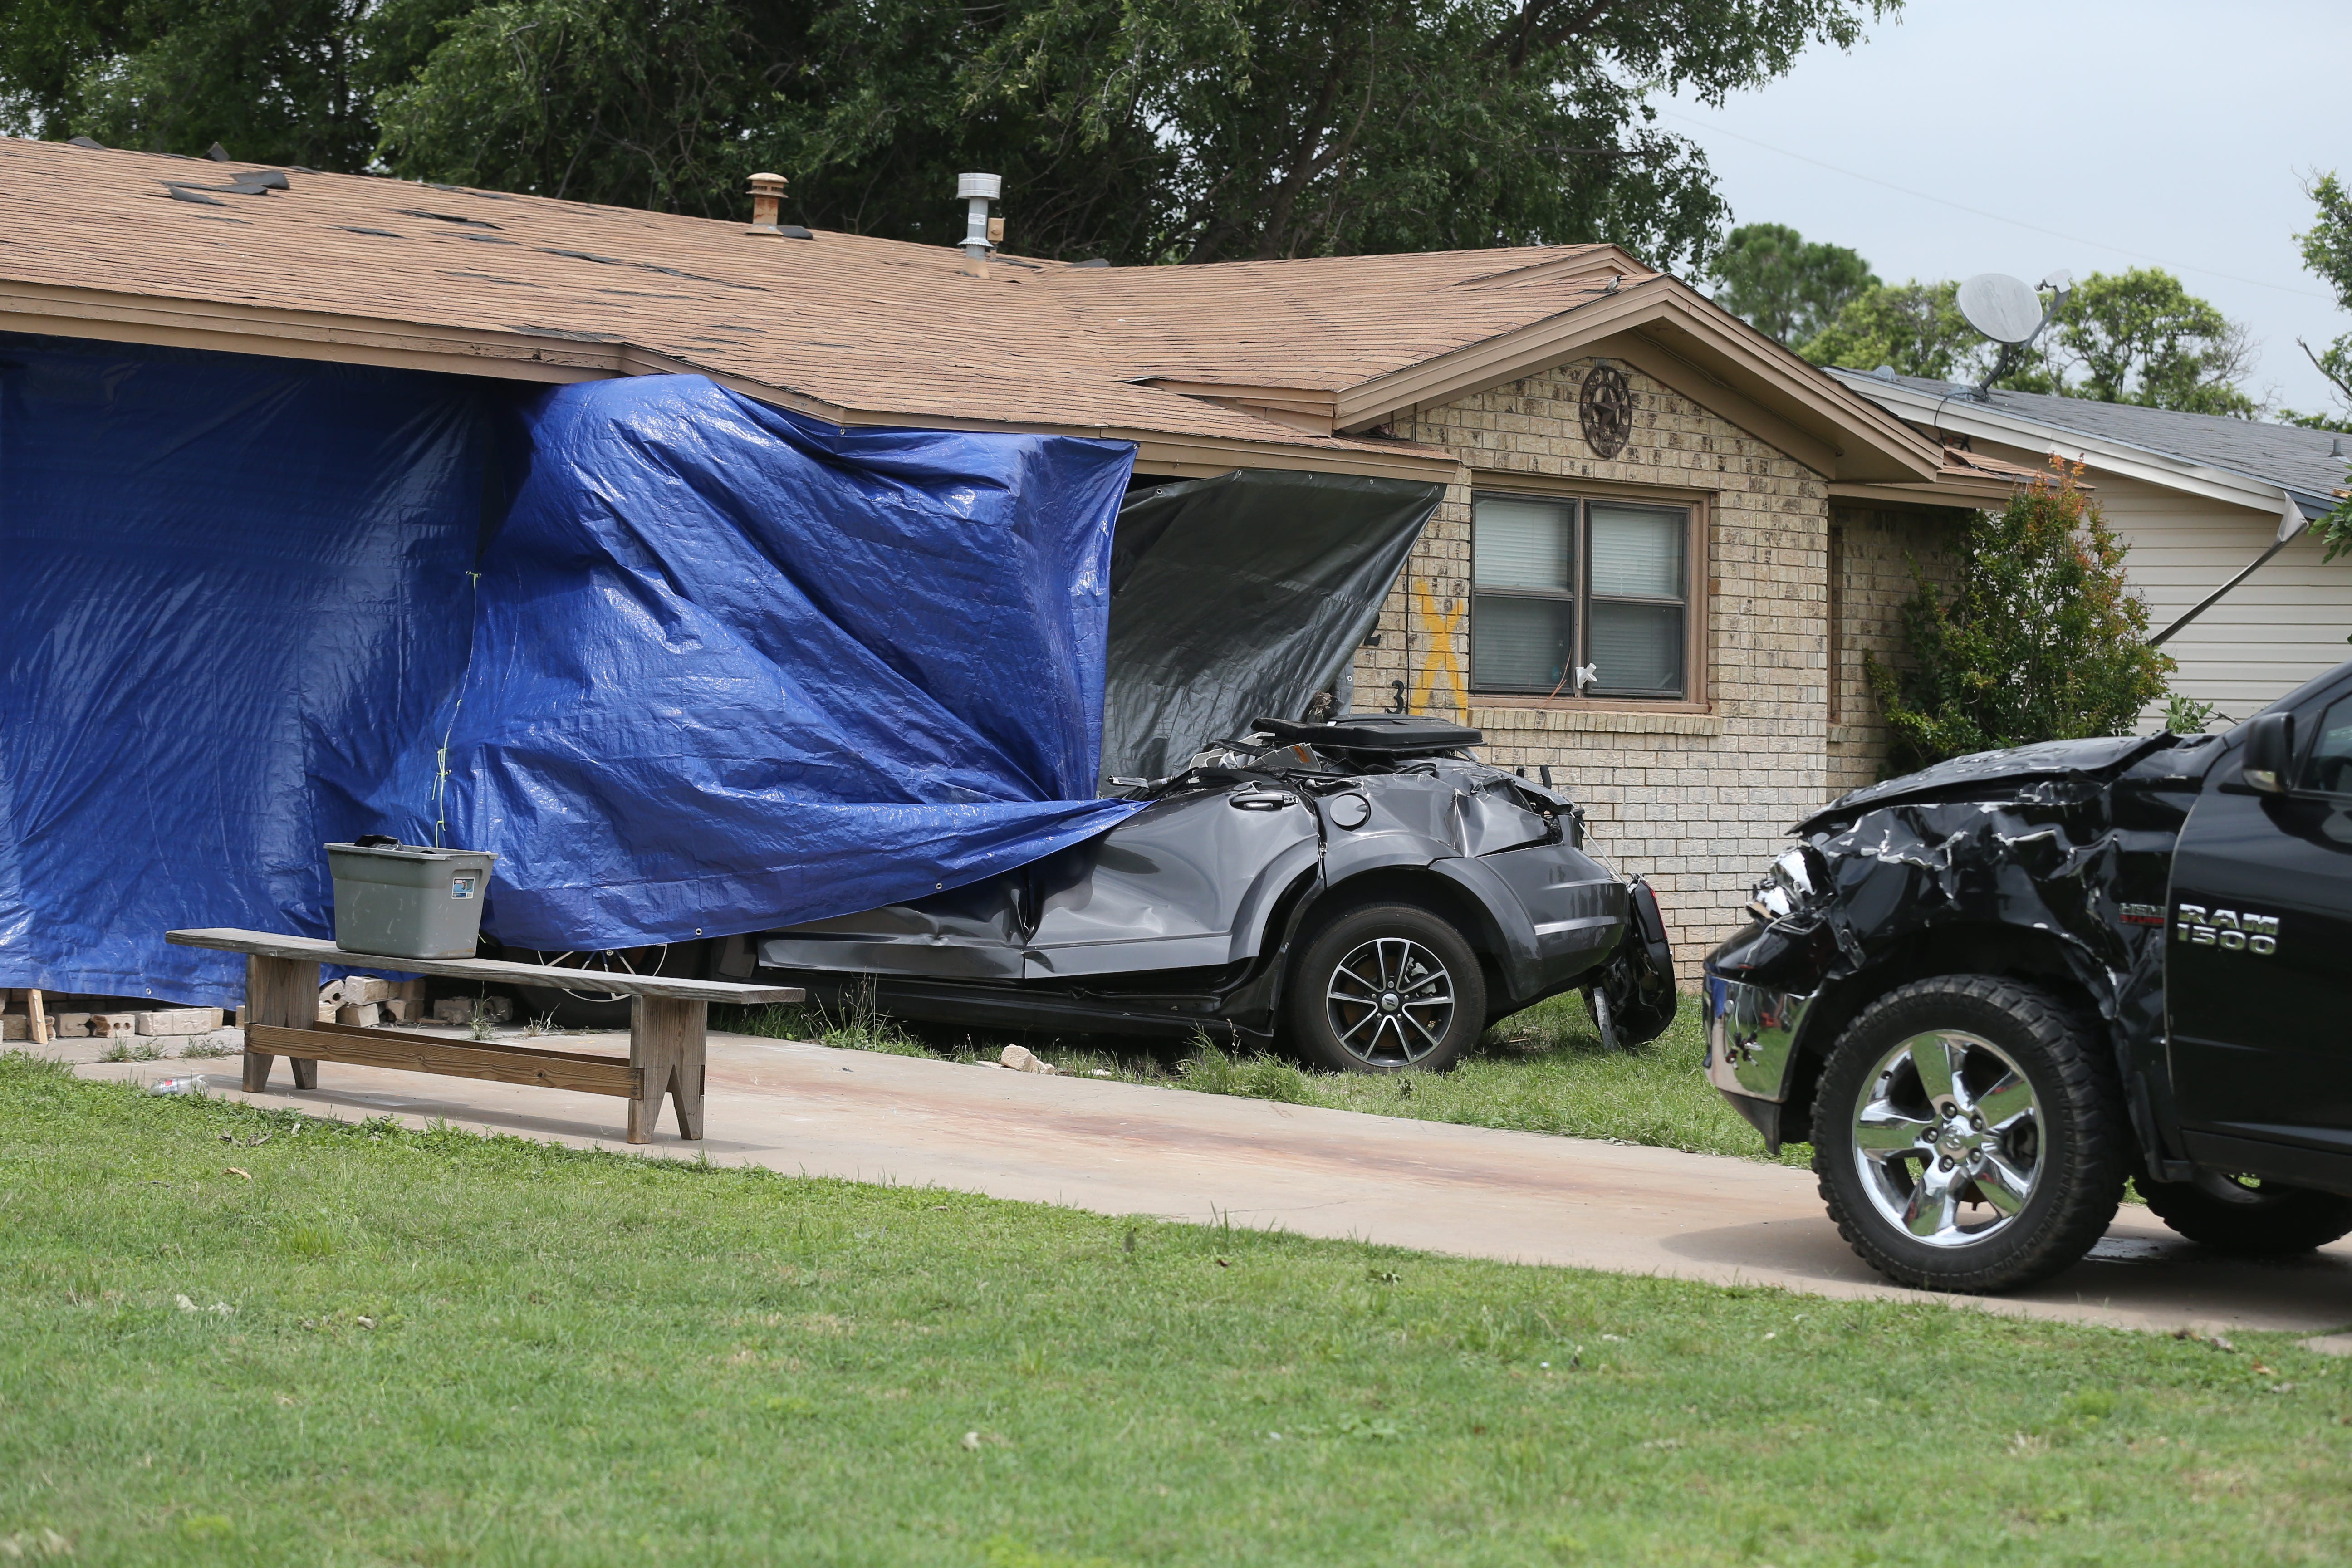 Two vehicles on 24th Street in San Angelo were heavily damaged and one of them slammed into the house during  a storm that hit town early Saturday, May 18, 2019.